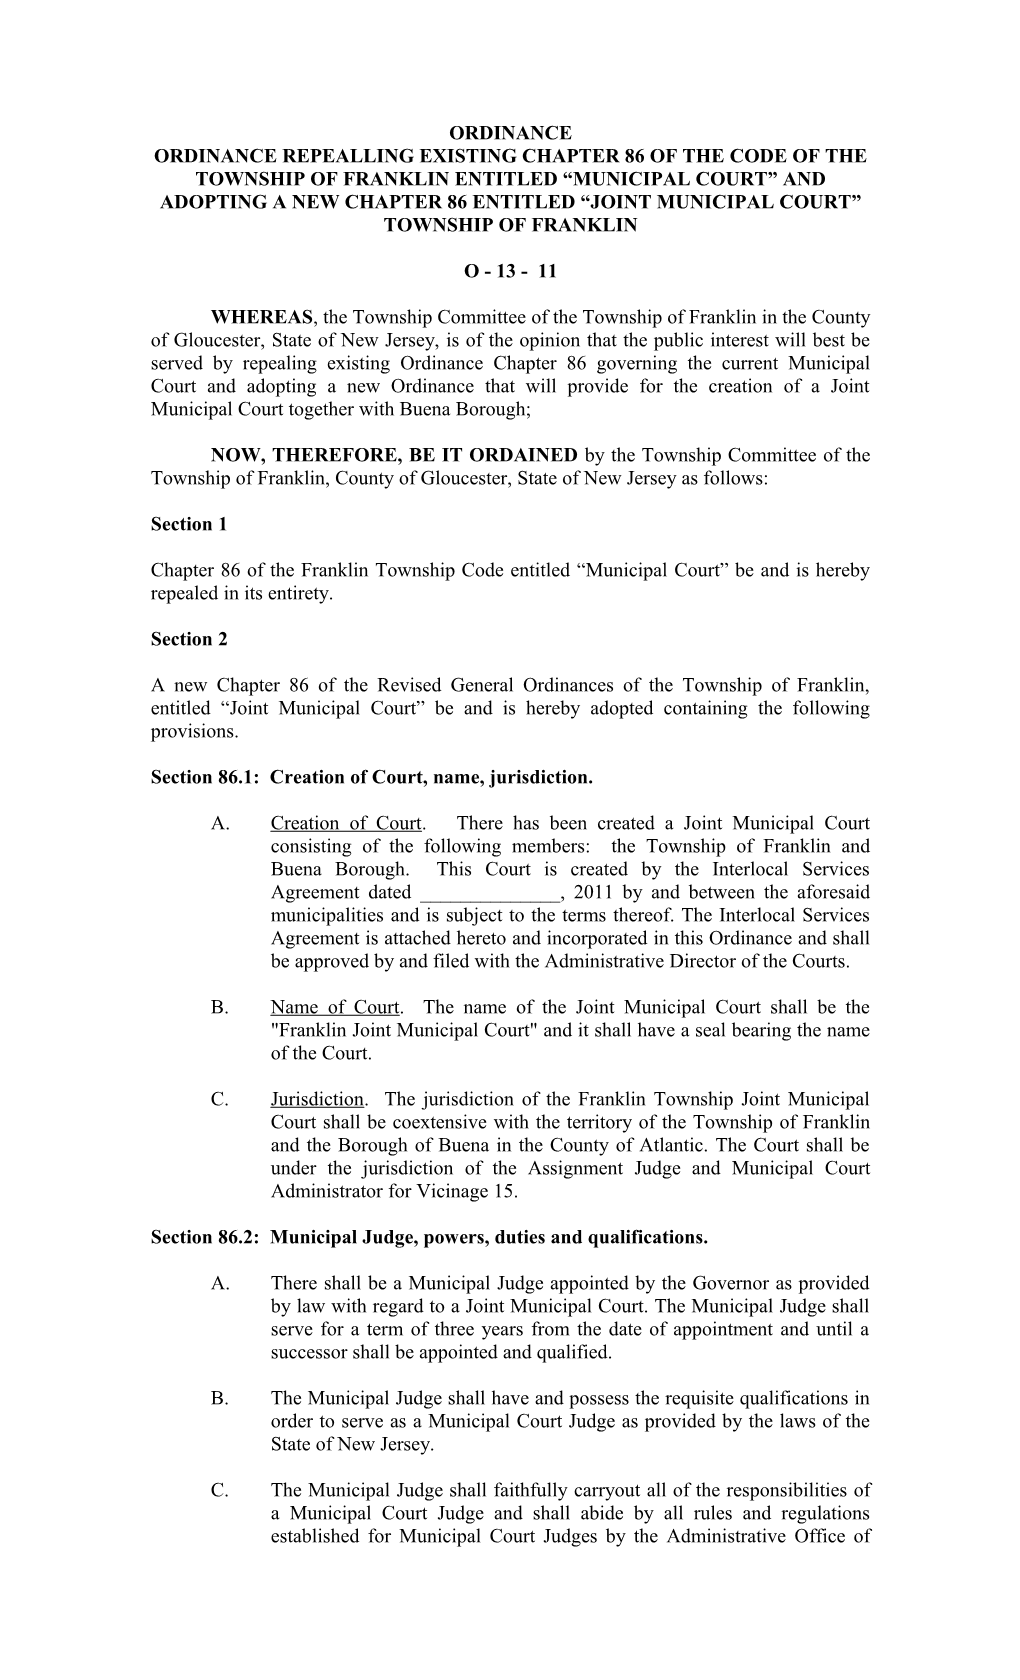 Ordinance Repealling Existing Chapter 86 of the Code of the Township of Franklin Entitled